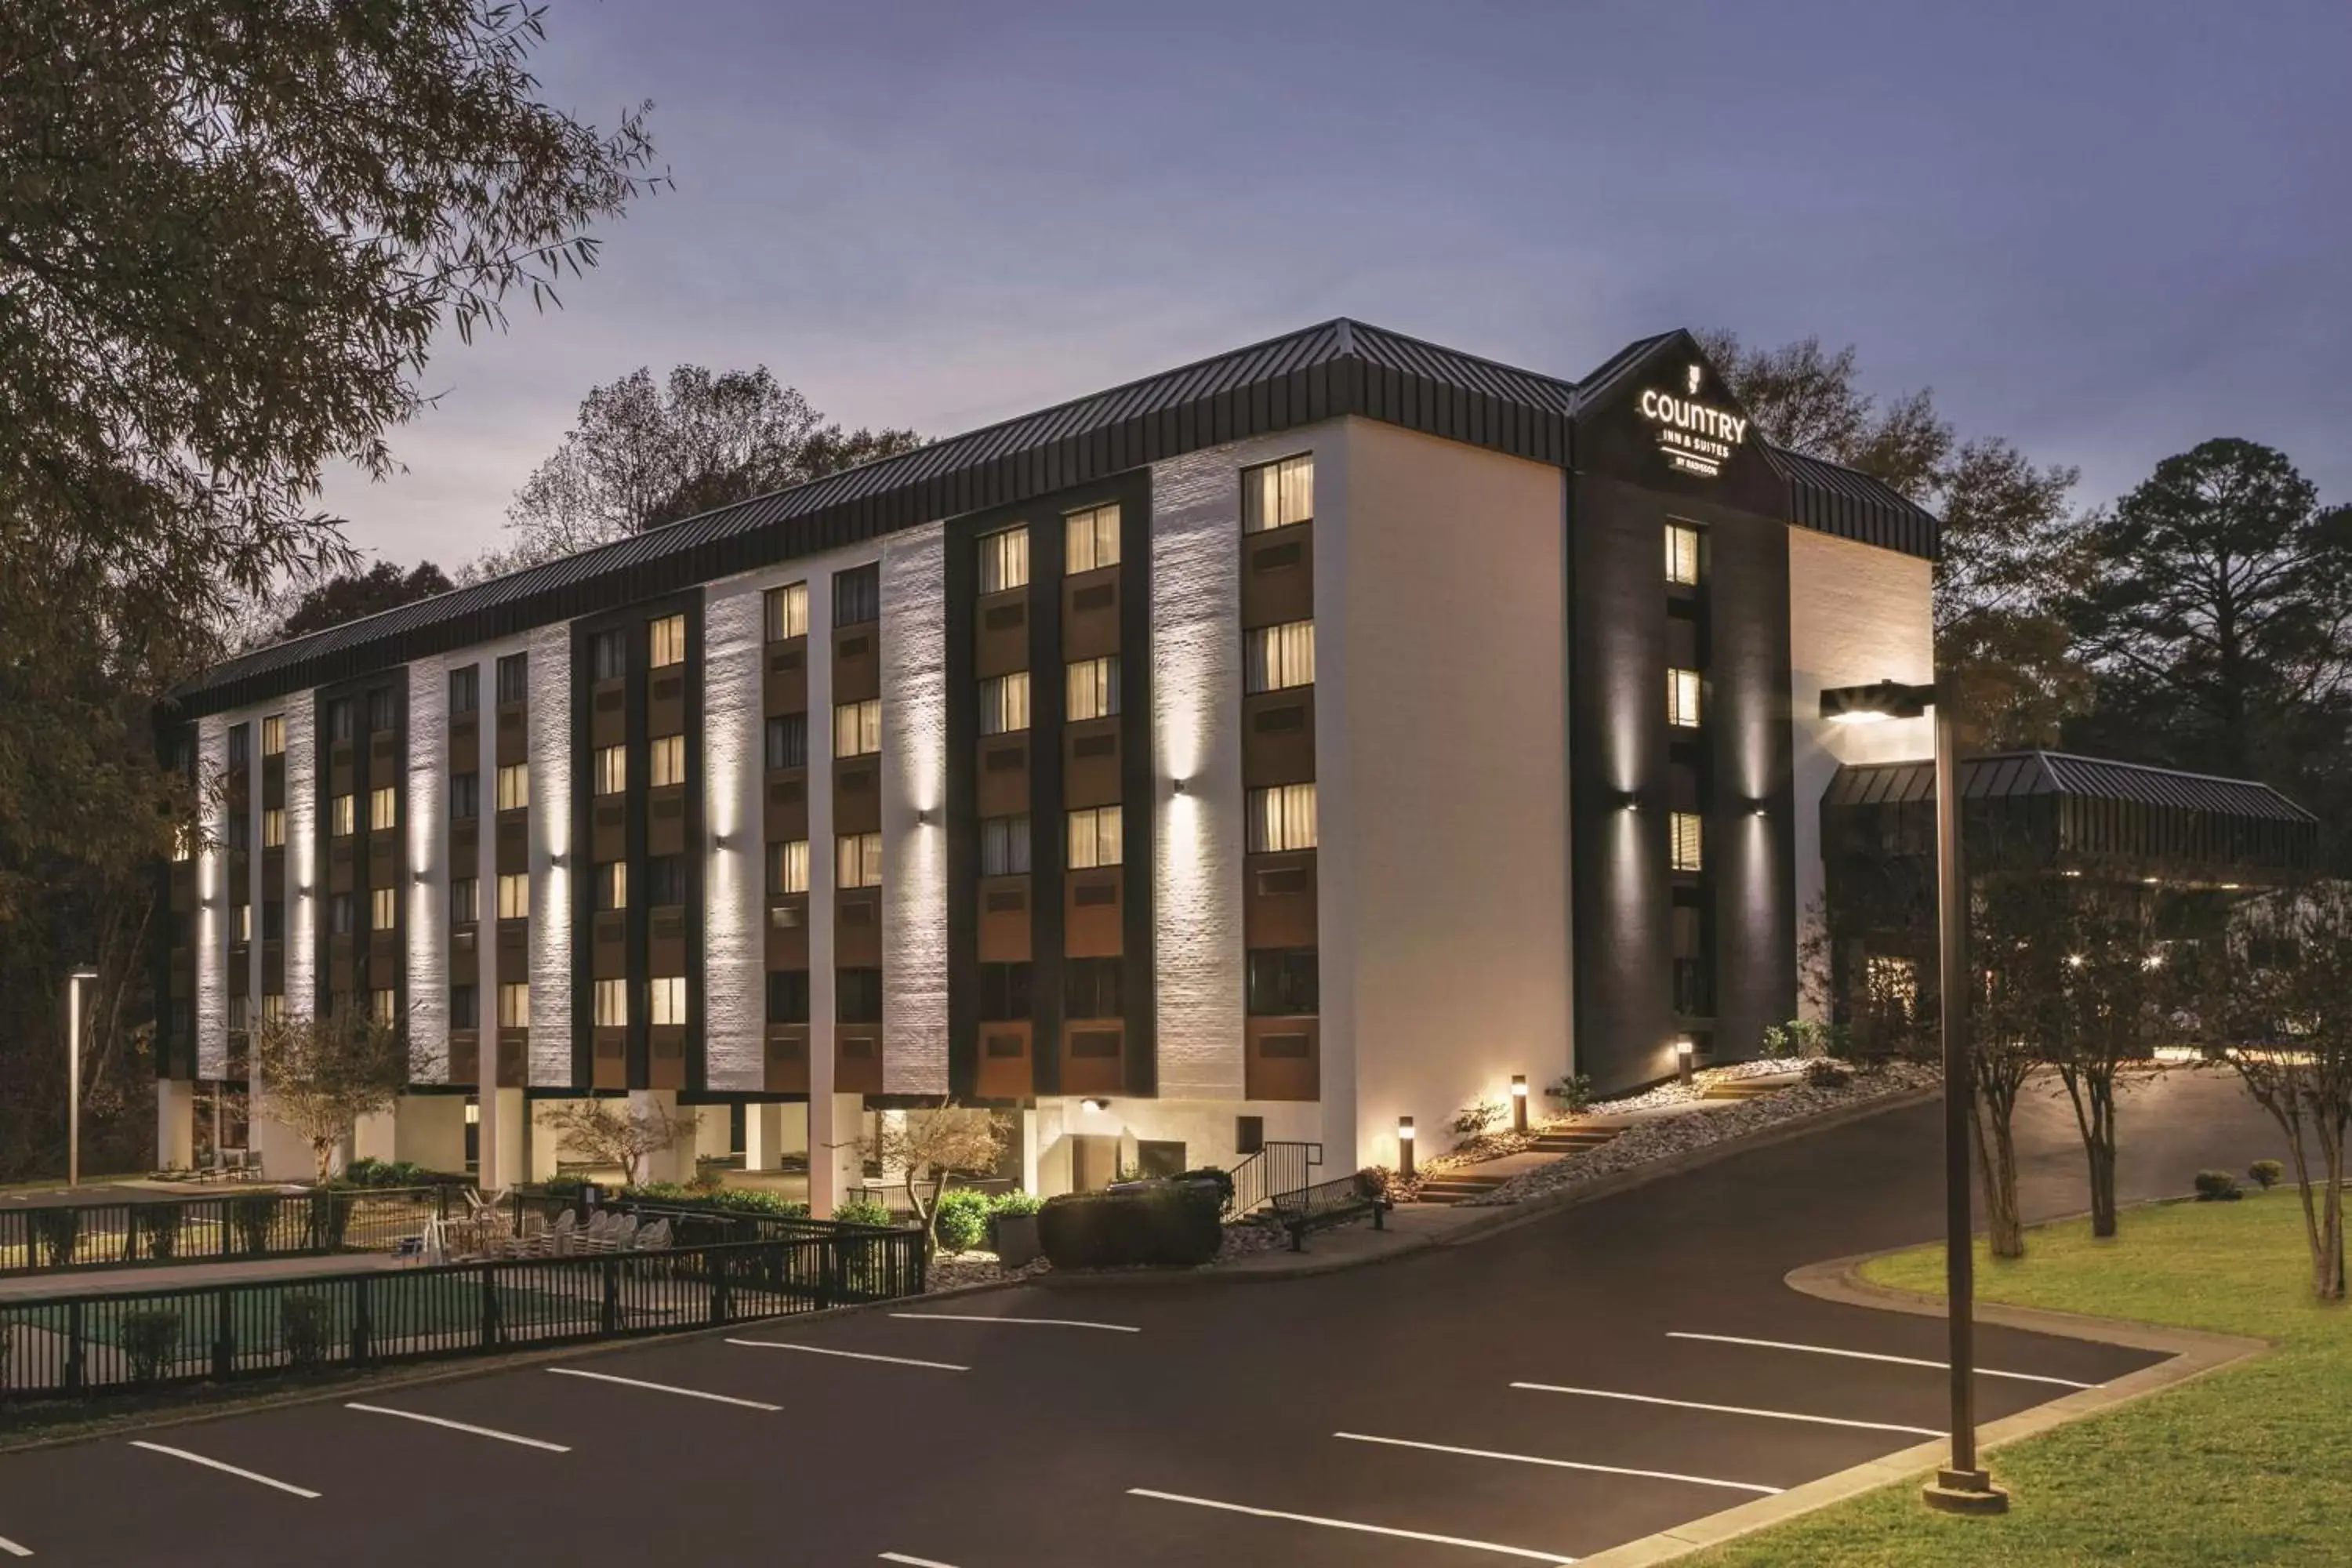 Property Building in Country Inn & Suites by Radisson, Williamsburg East (Busch Gardens), VA